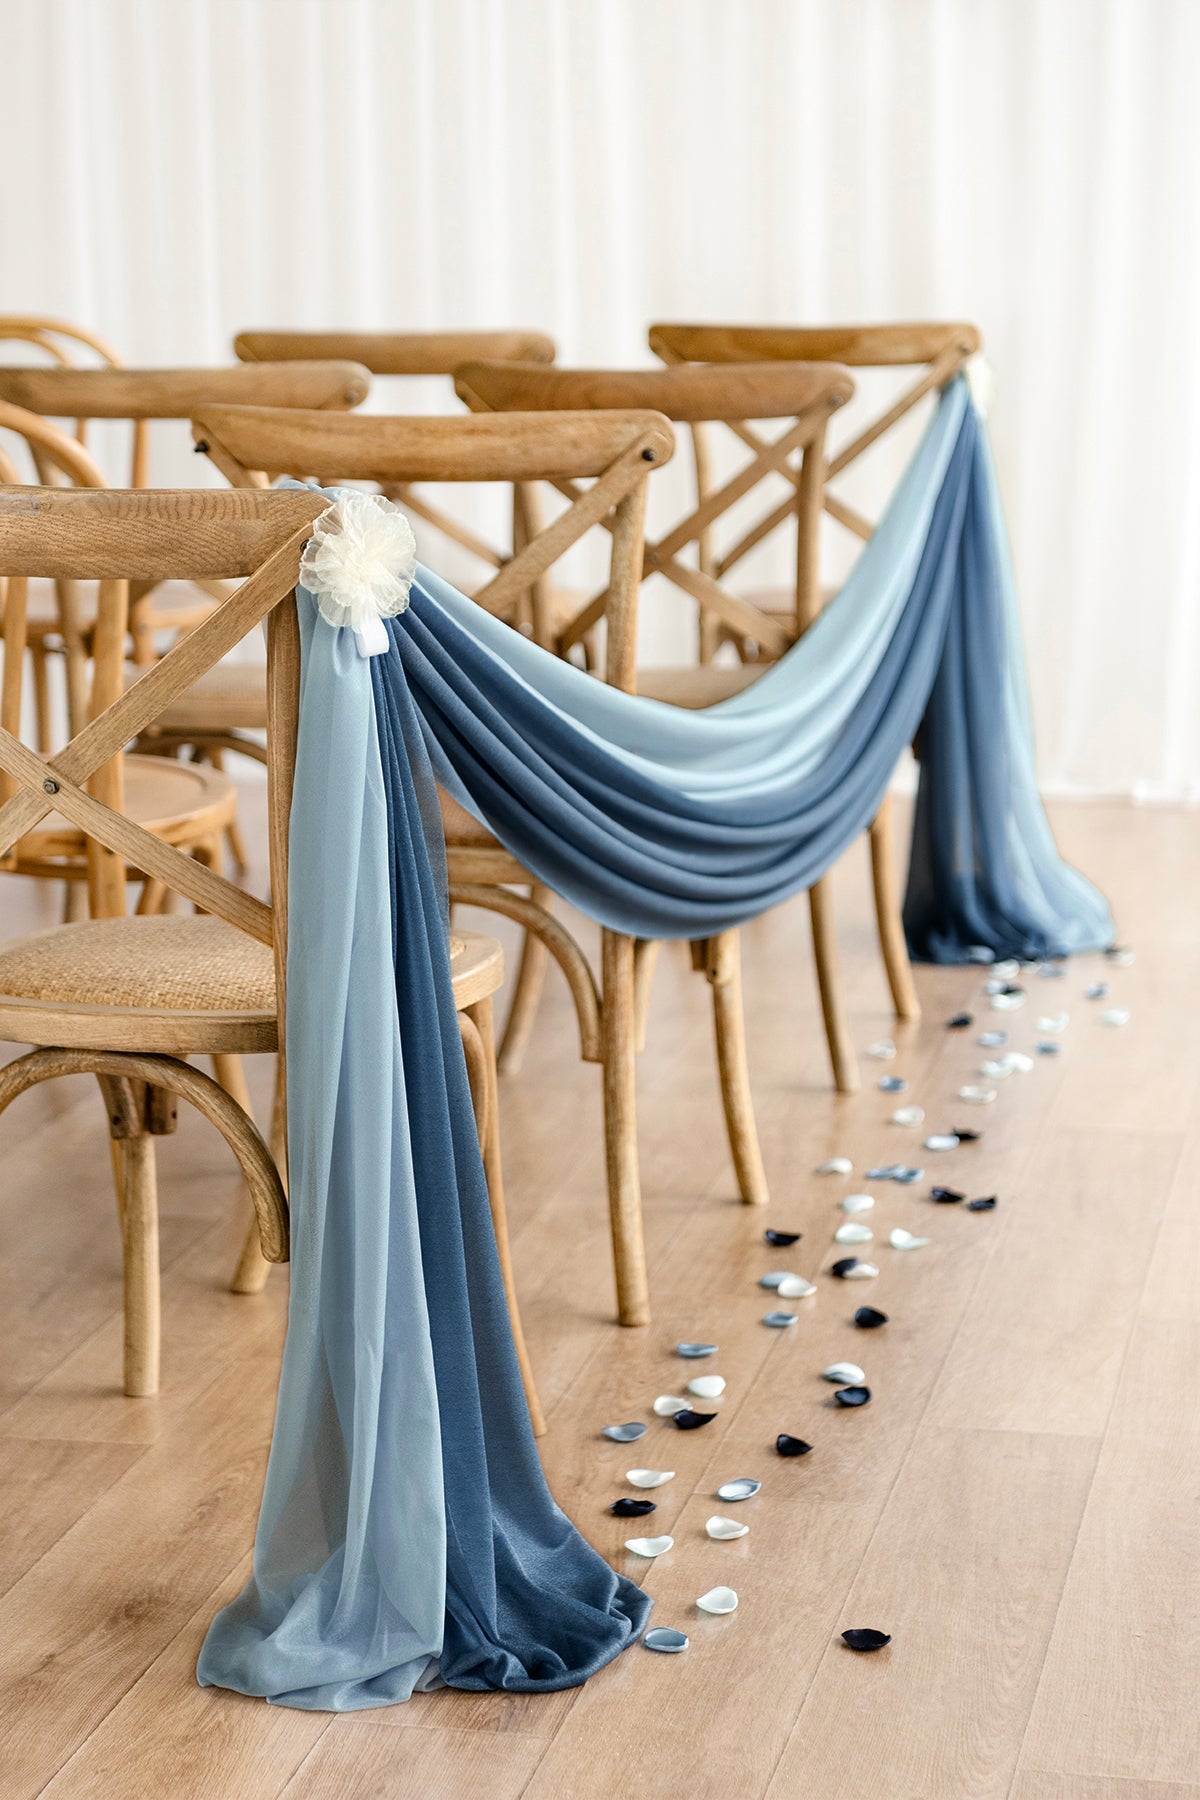 Sheer Aisle Swags for Church Wedding in Dusty Rose & Navy